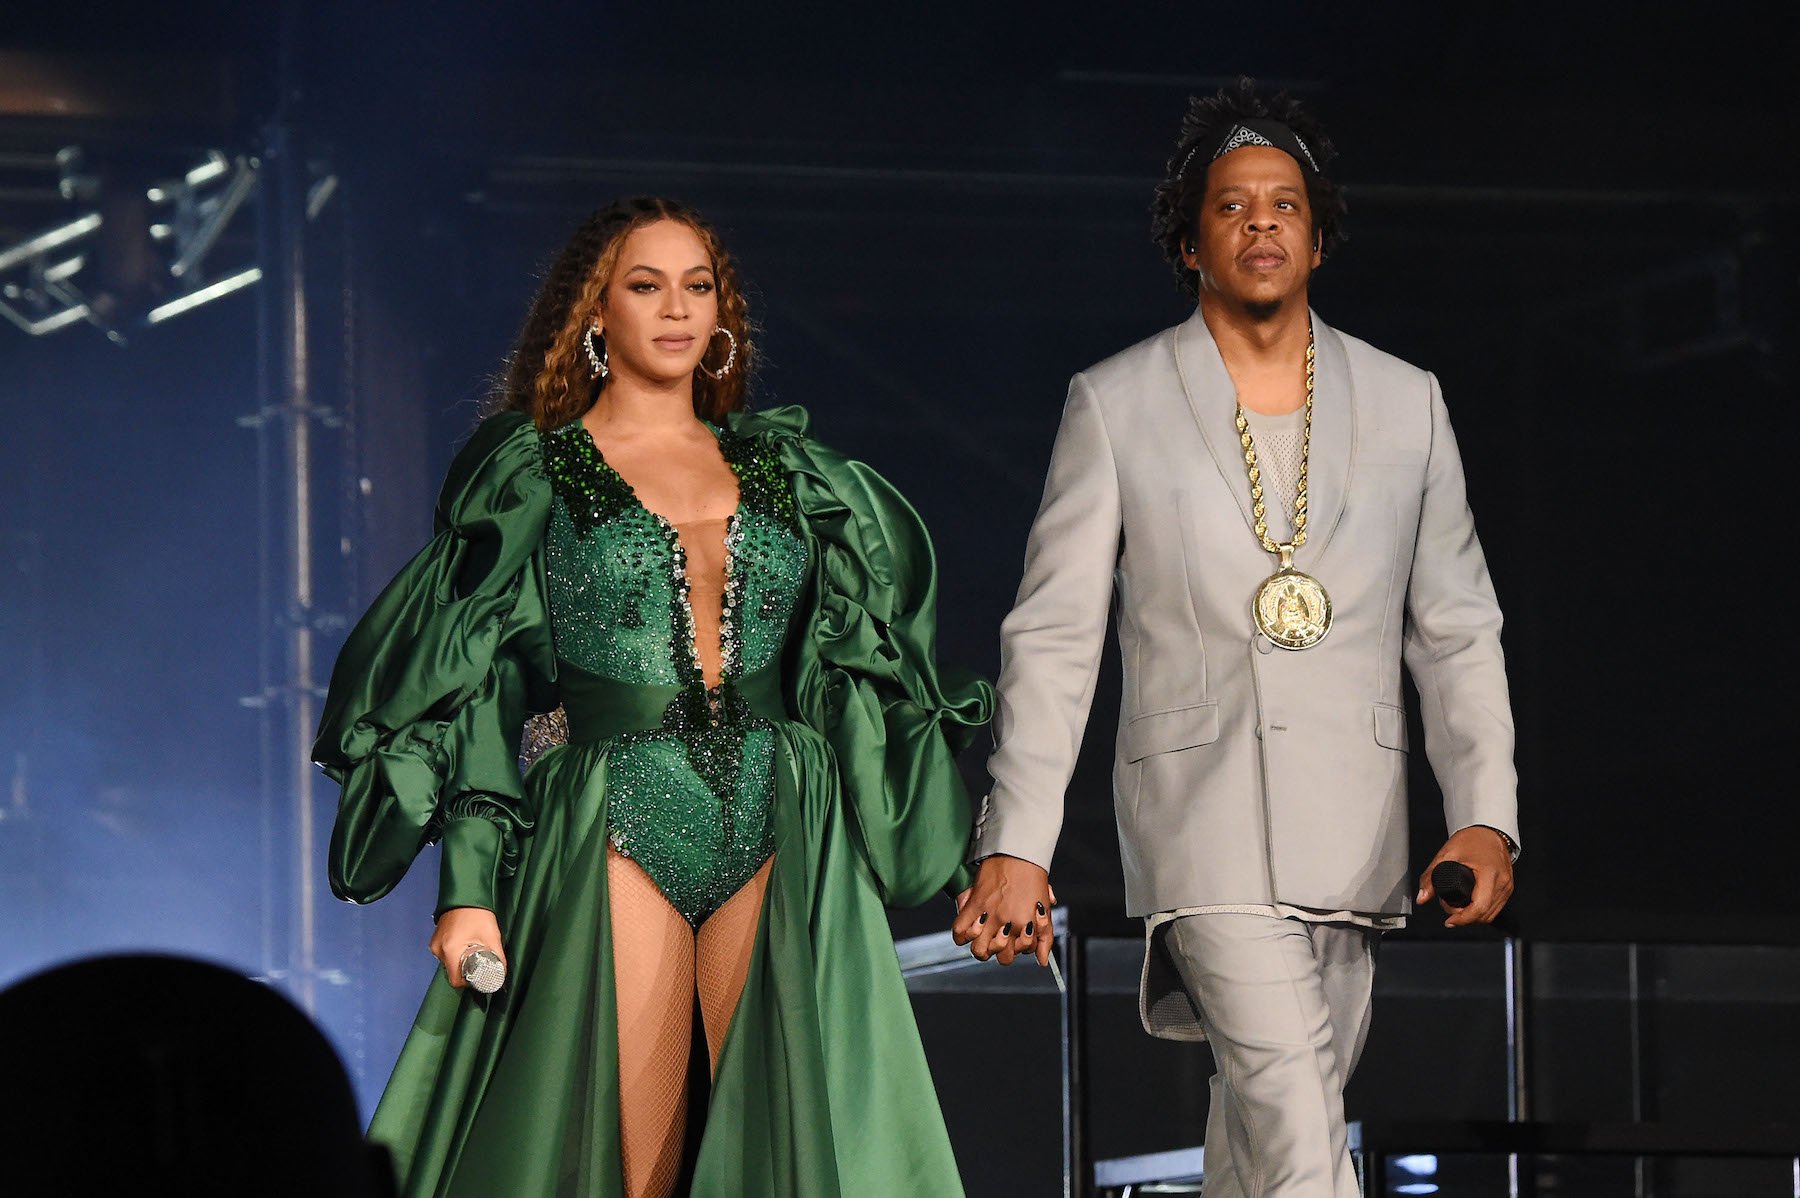 Beyoncé And Jay Z Are Tied For The Most Nominations In Grammys History